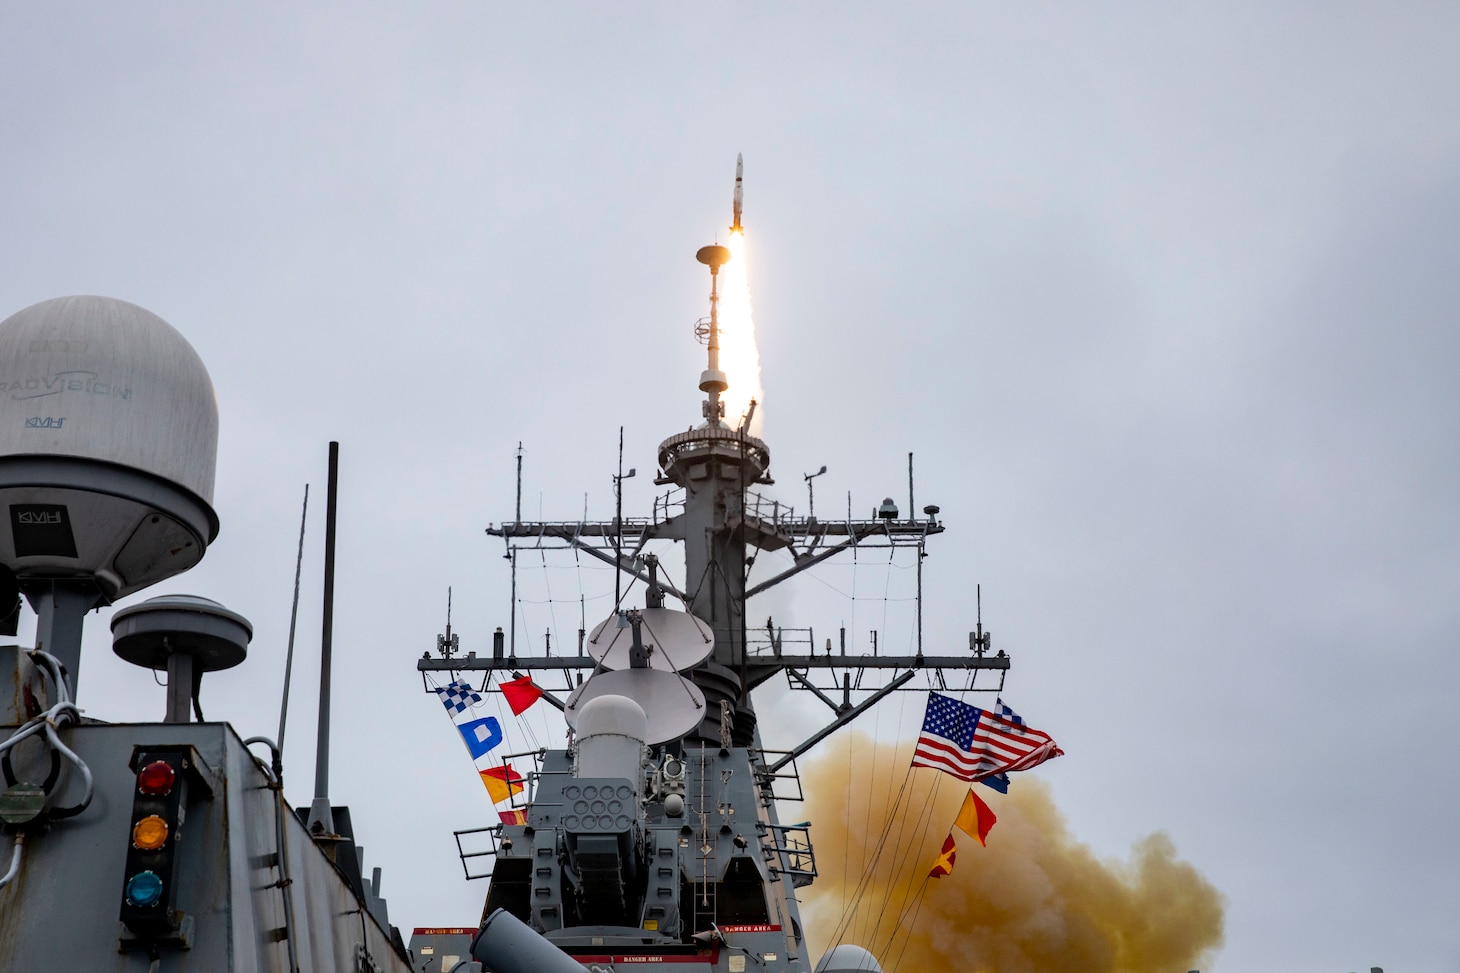 The Arleigh Burke-class guided-missile destroyer USS Porter (DDG 78) launches a Standard Missile-2 Block 3A interceptor missile during a live-fire exercise in support of exercise Formidable Shield 2023, May 20, 2023. Formidable Shield is a biennial exercise involving a series of live-fire events against subsonic, supersonic, and ballistic targets, incorporating multiple Allied ships, aircraft, and ground forces working across battle spaces to deliver effects. (U.S. Navy photo by Mass Communication Specialist 2nd Class Sawyer Connally)